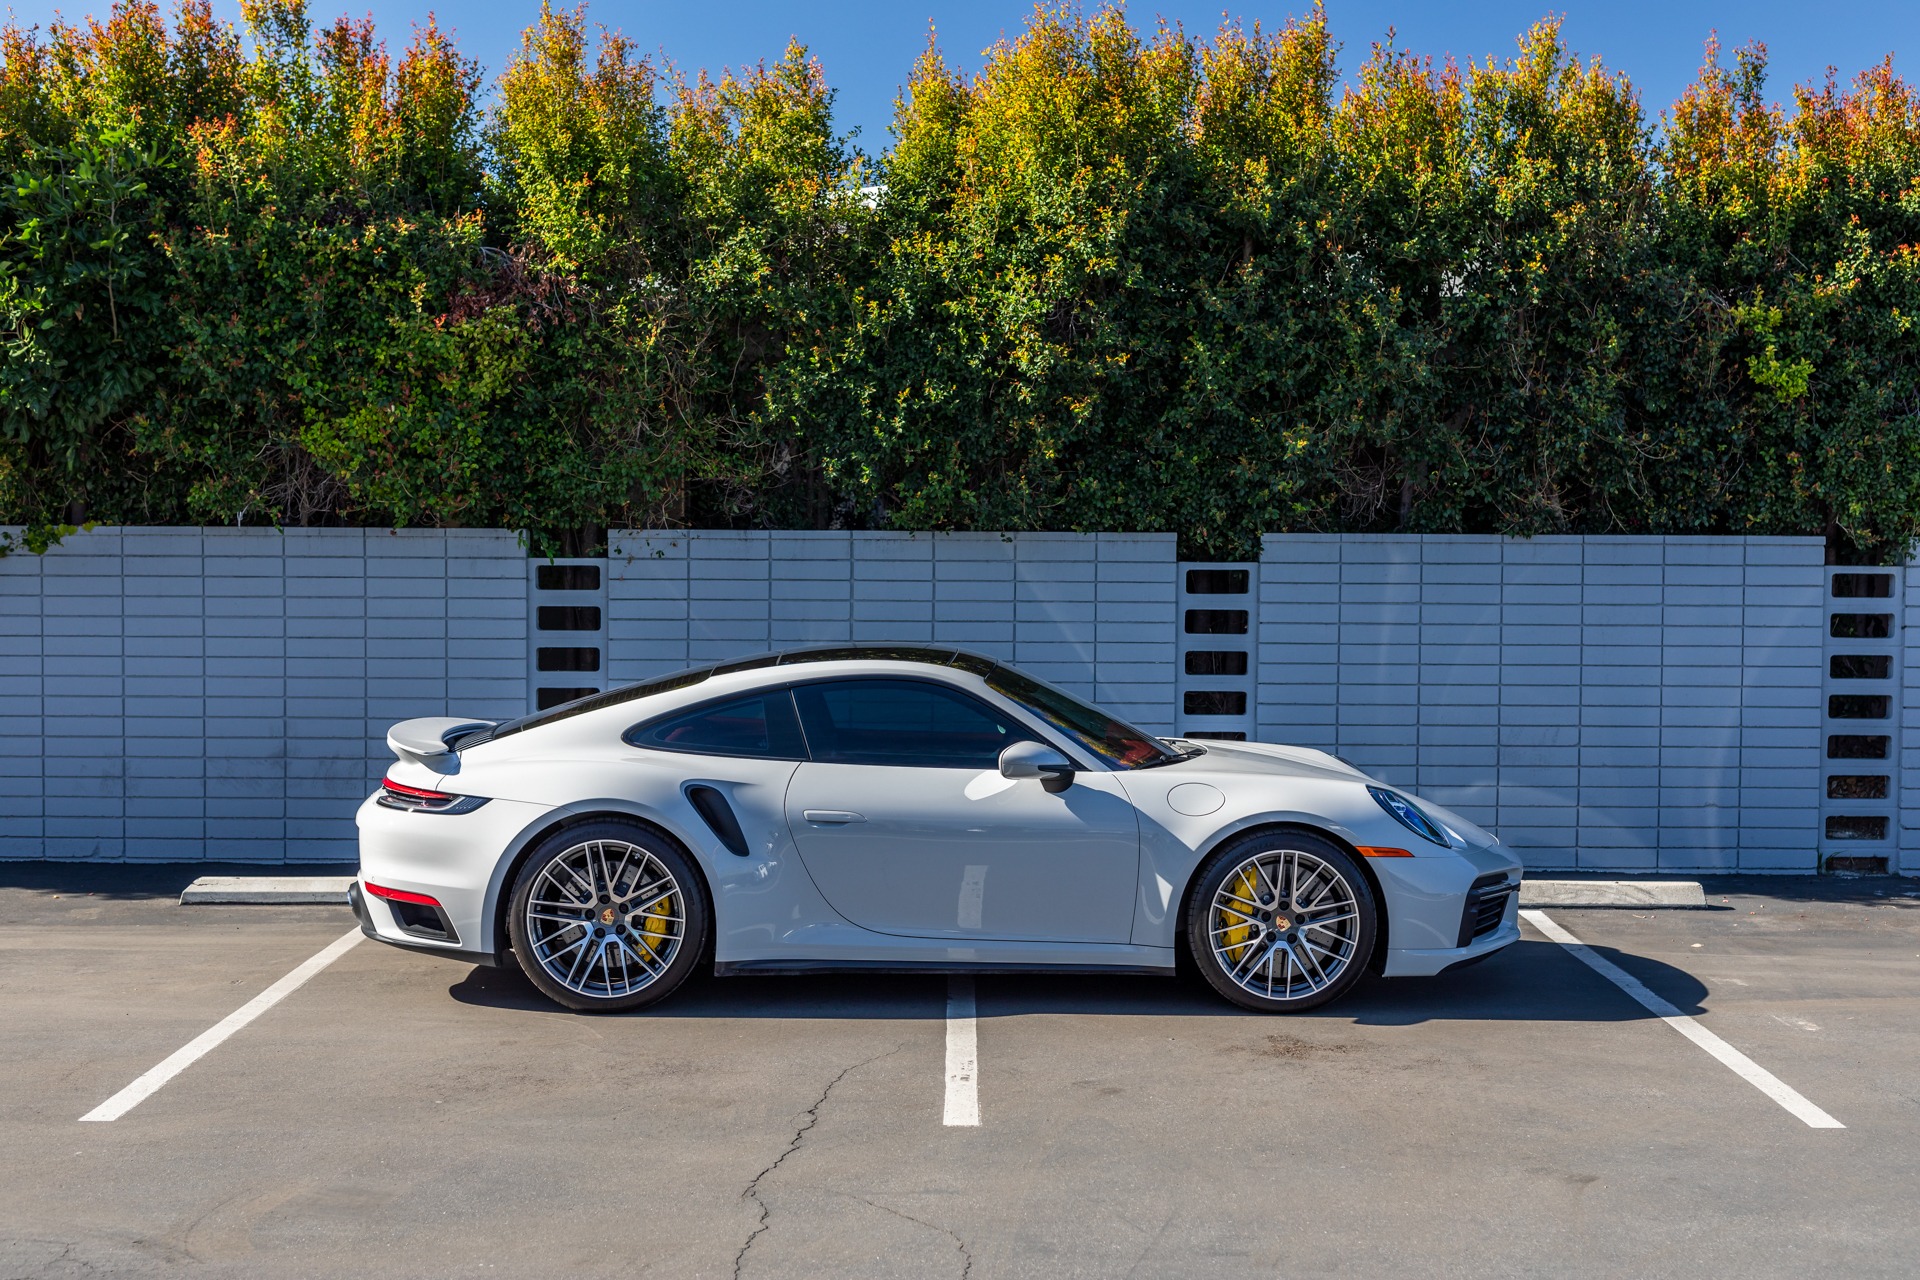 2023 Used Porsche 911 Turbo S Coupe at Presidential Auto Sales